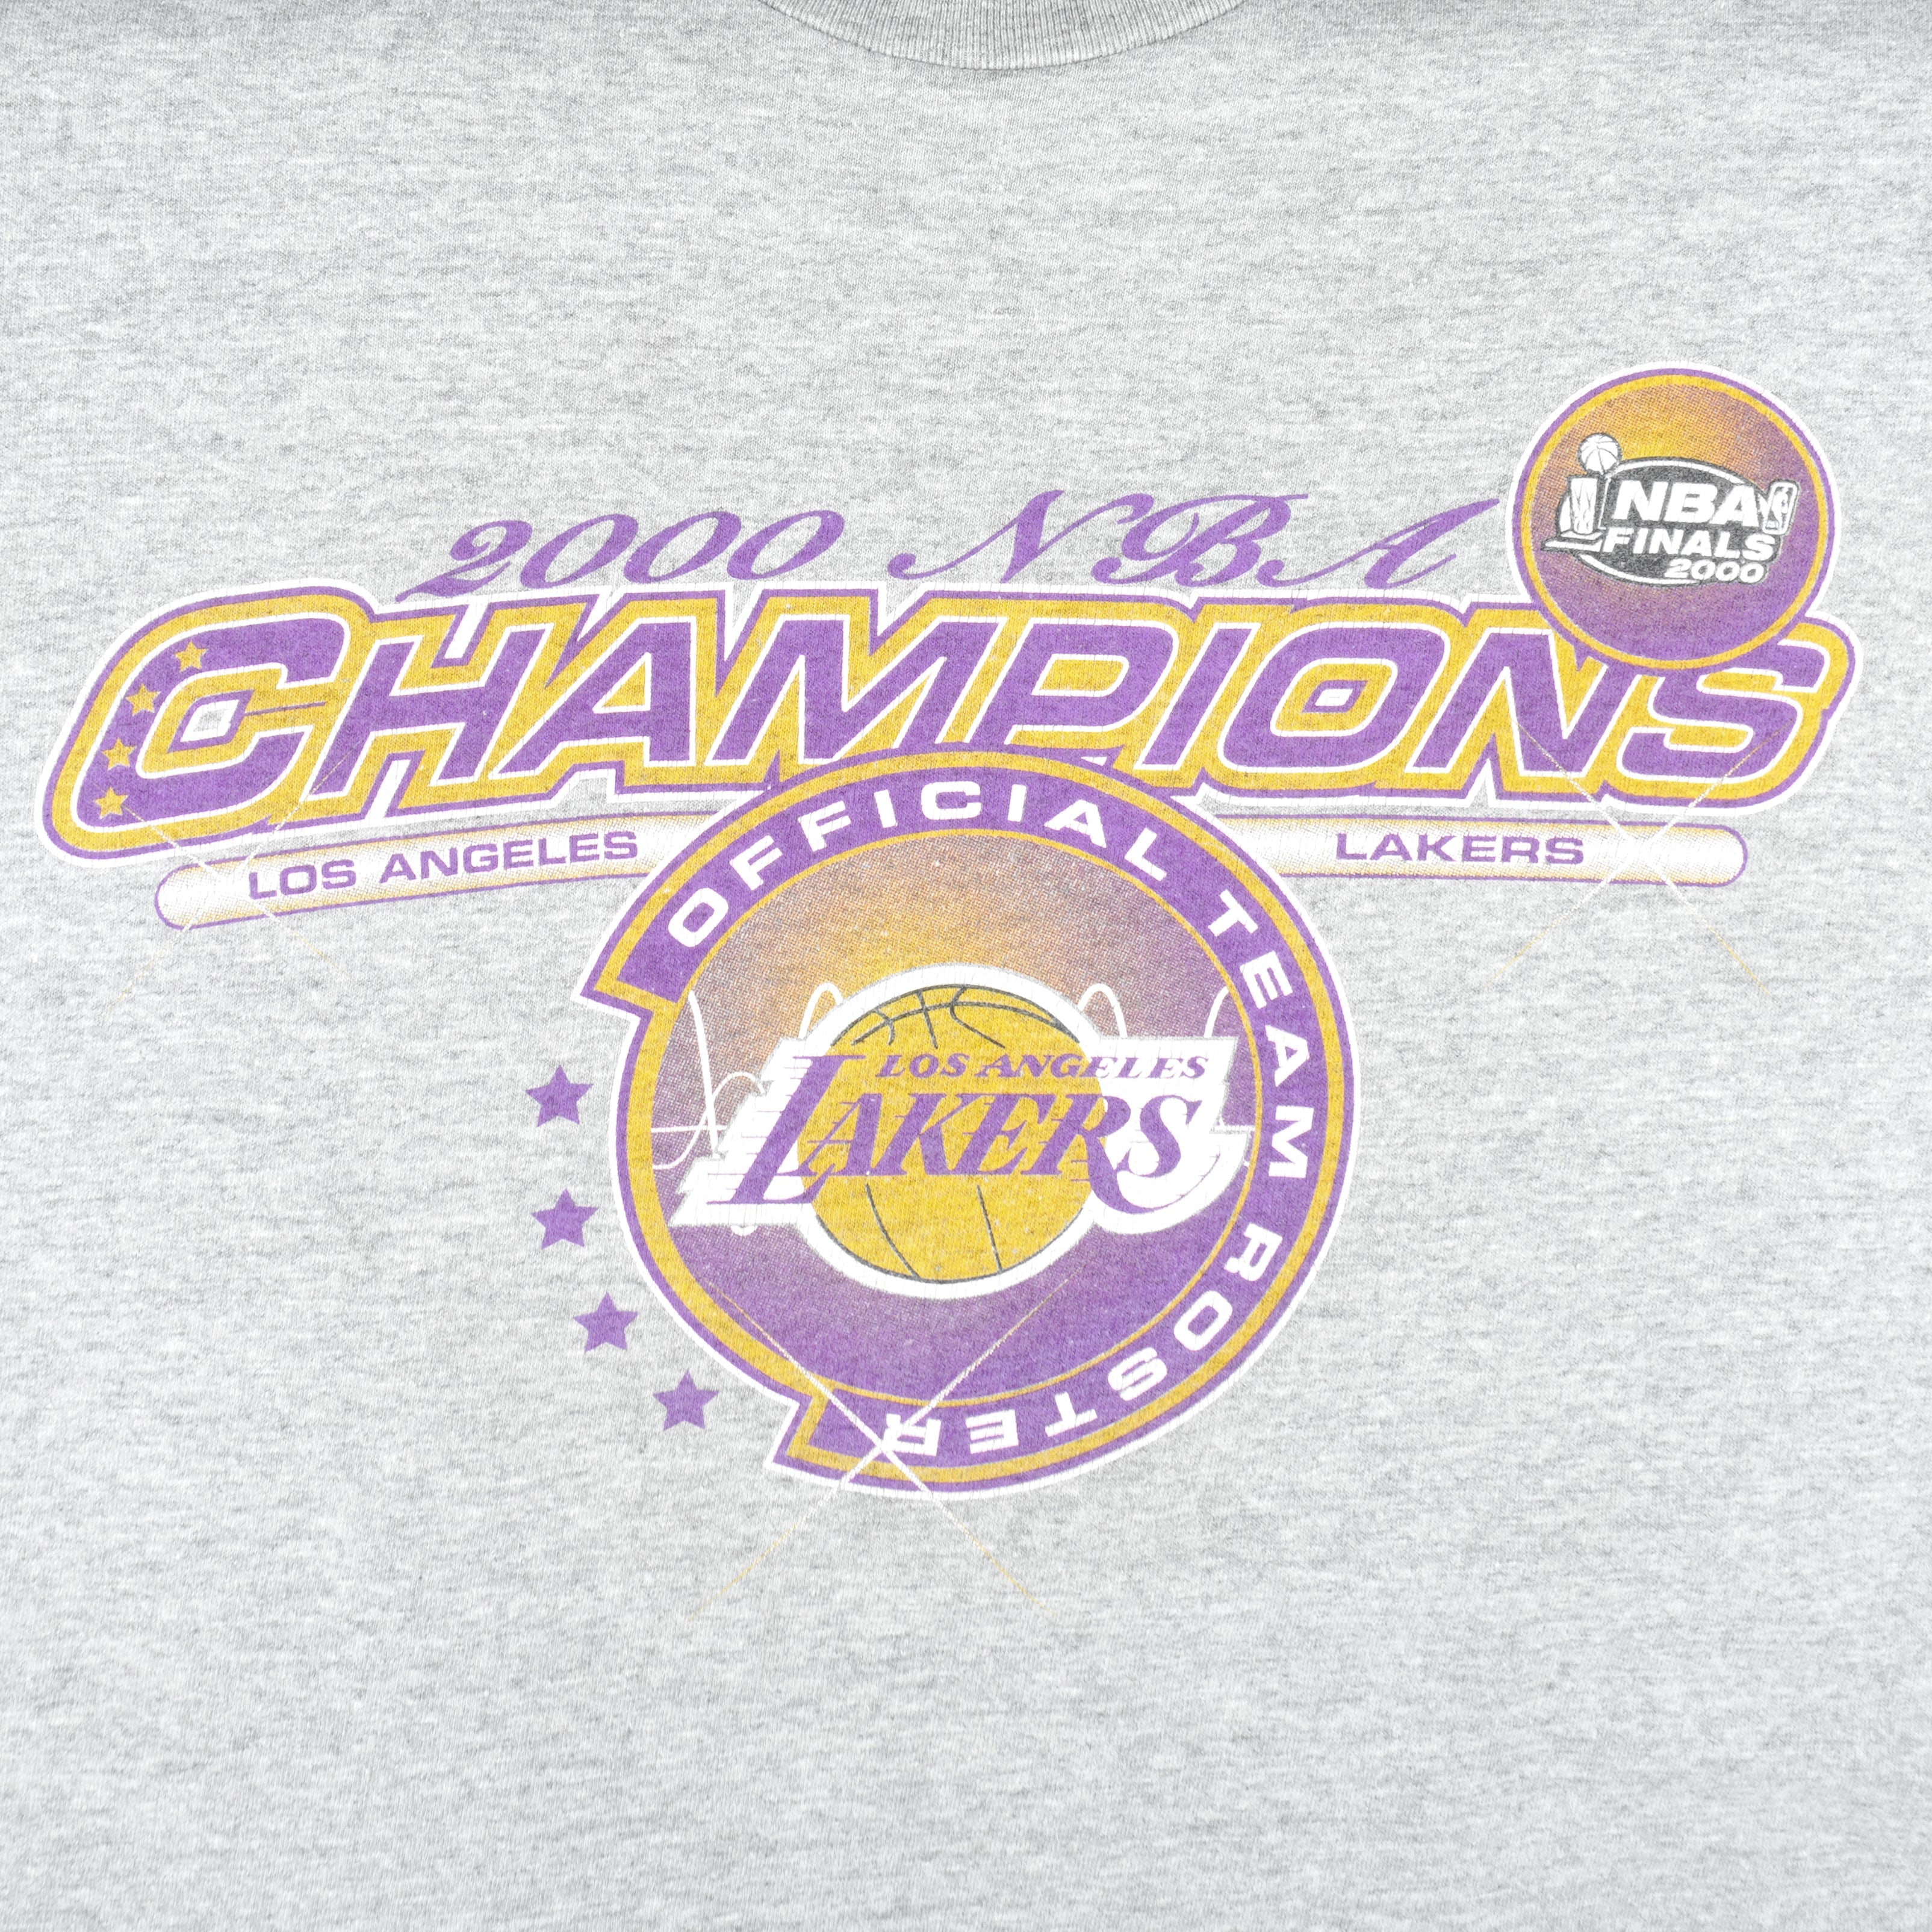 Los Angeles Lakers 2020 Playoff Gear, Lakers Collection, Lakers 2020  Playoff Gear Gear